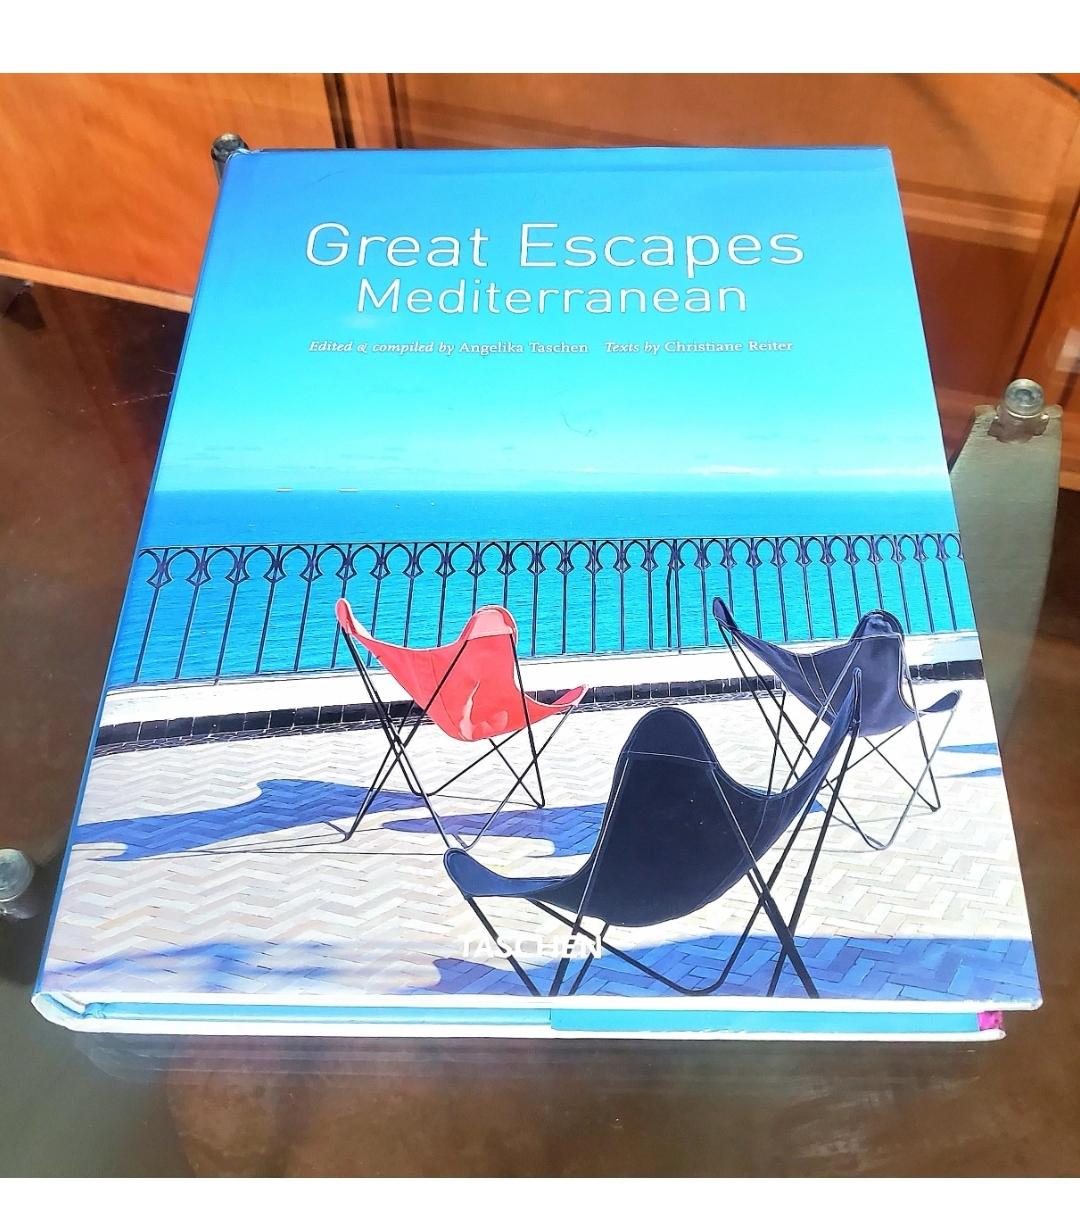 Set of 2 Taschen Great Escape Books From the Estate of Christian Audigier In Good Condition For Sale In Waxahachie, TX